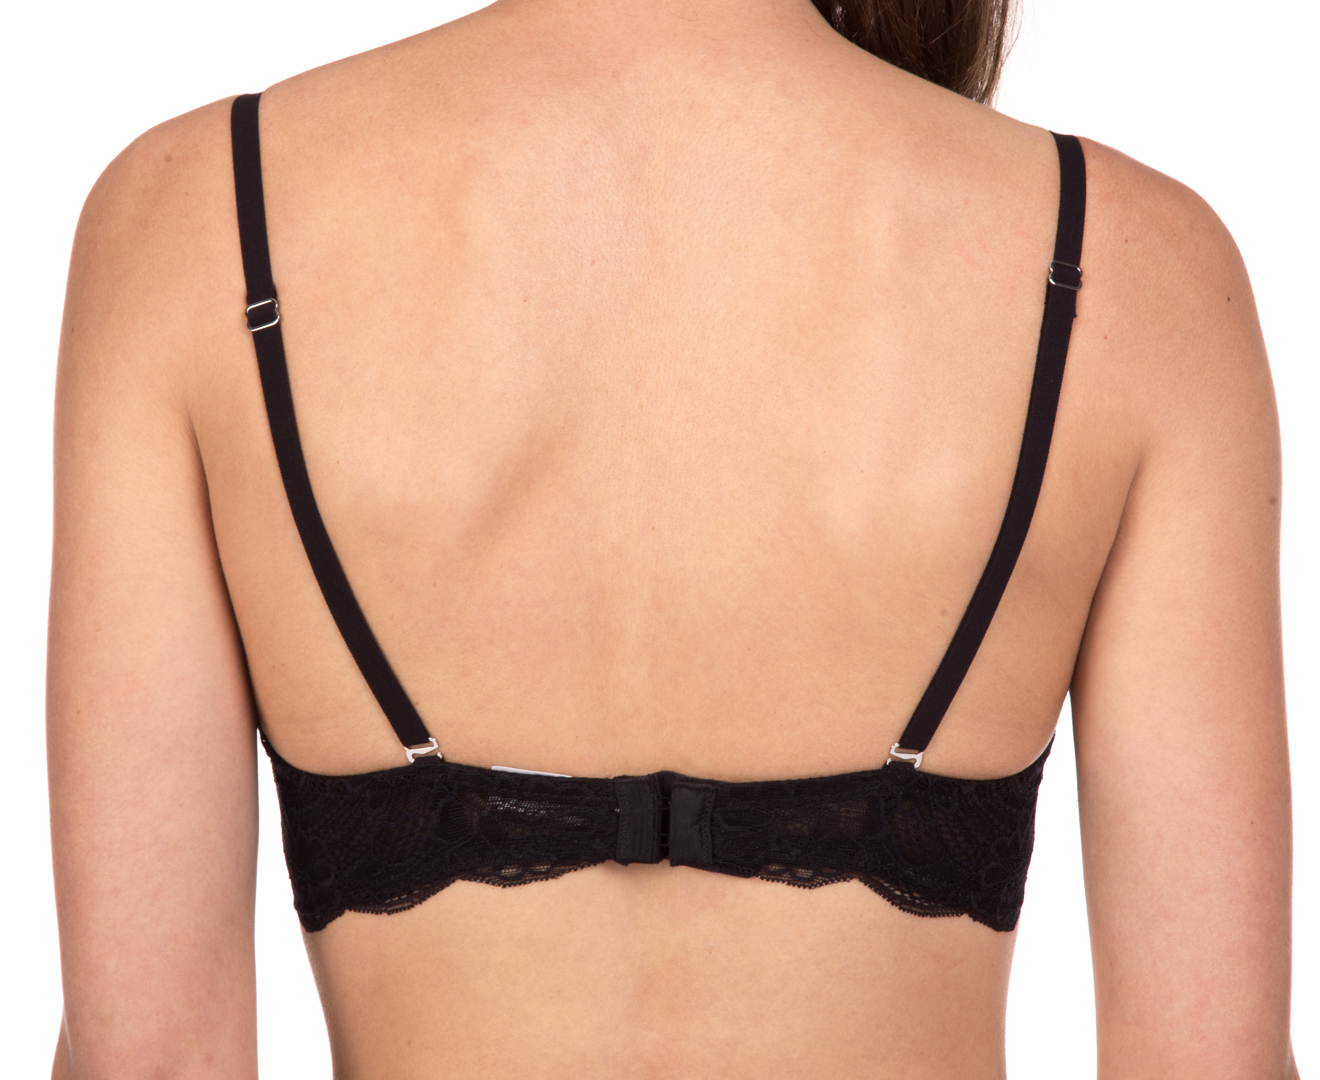 Kayser Women's Be Real Lace Push Up Bra - Black - Size 14D